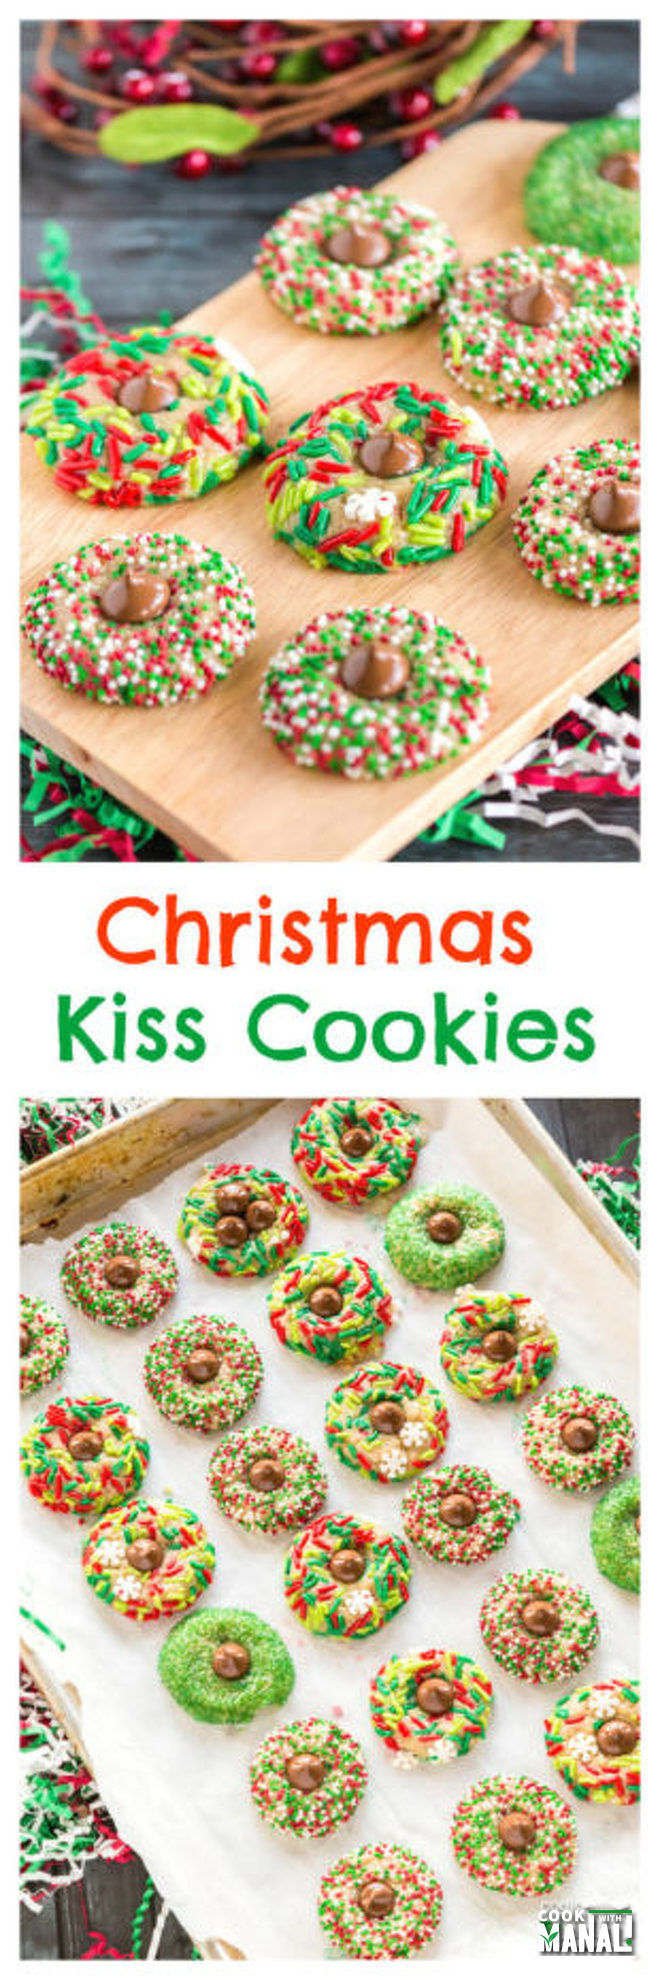 Christmas Kiss Cookies - Cook With Manali